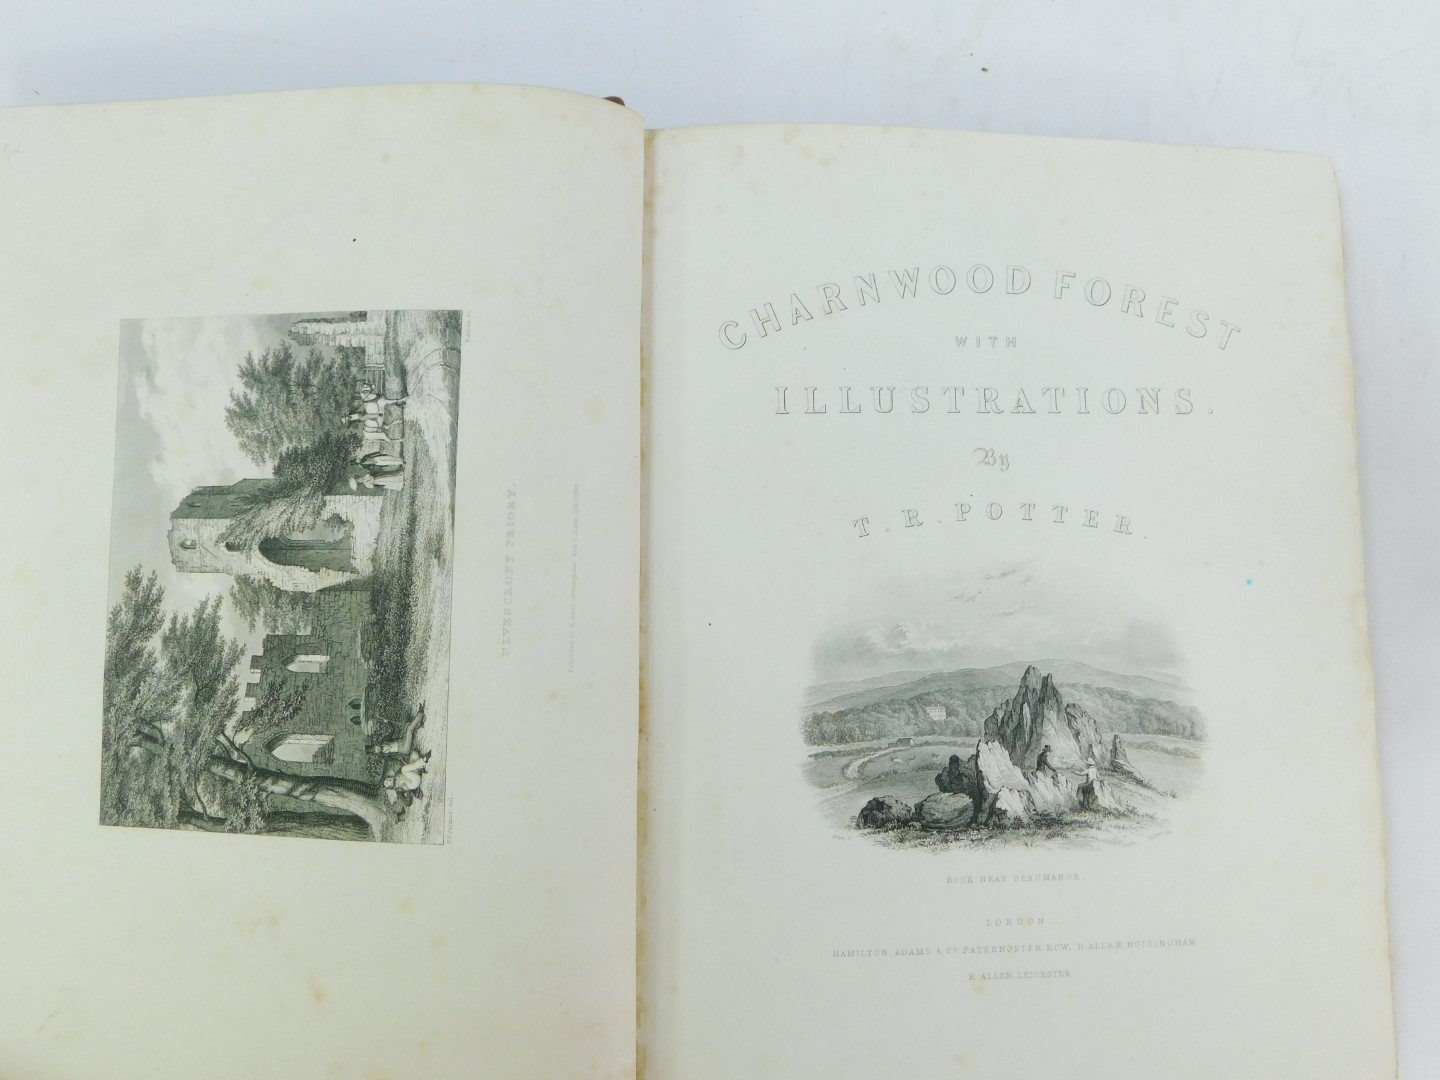 Potter (T R). The History and Antiquities of Charnwood Forest, with illustrations, published by - Image 2 of 6